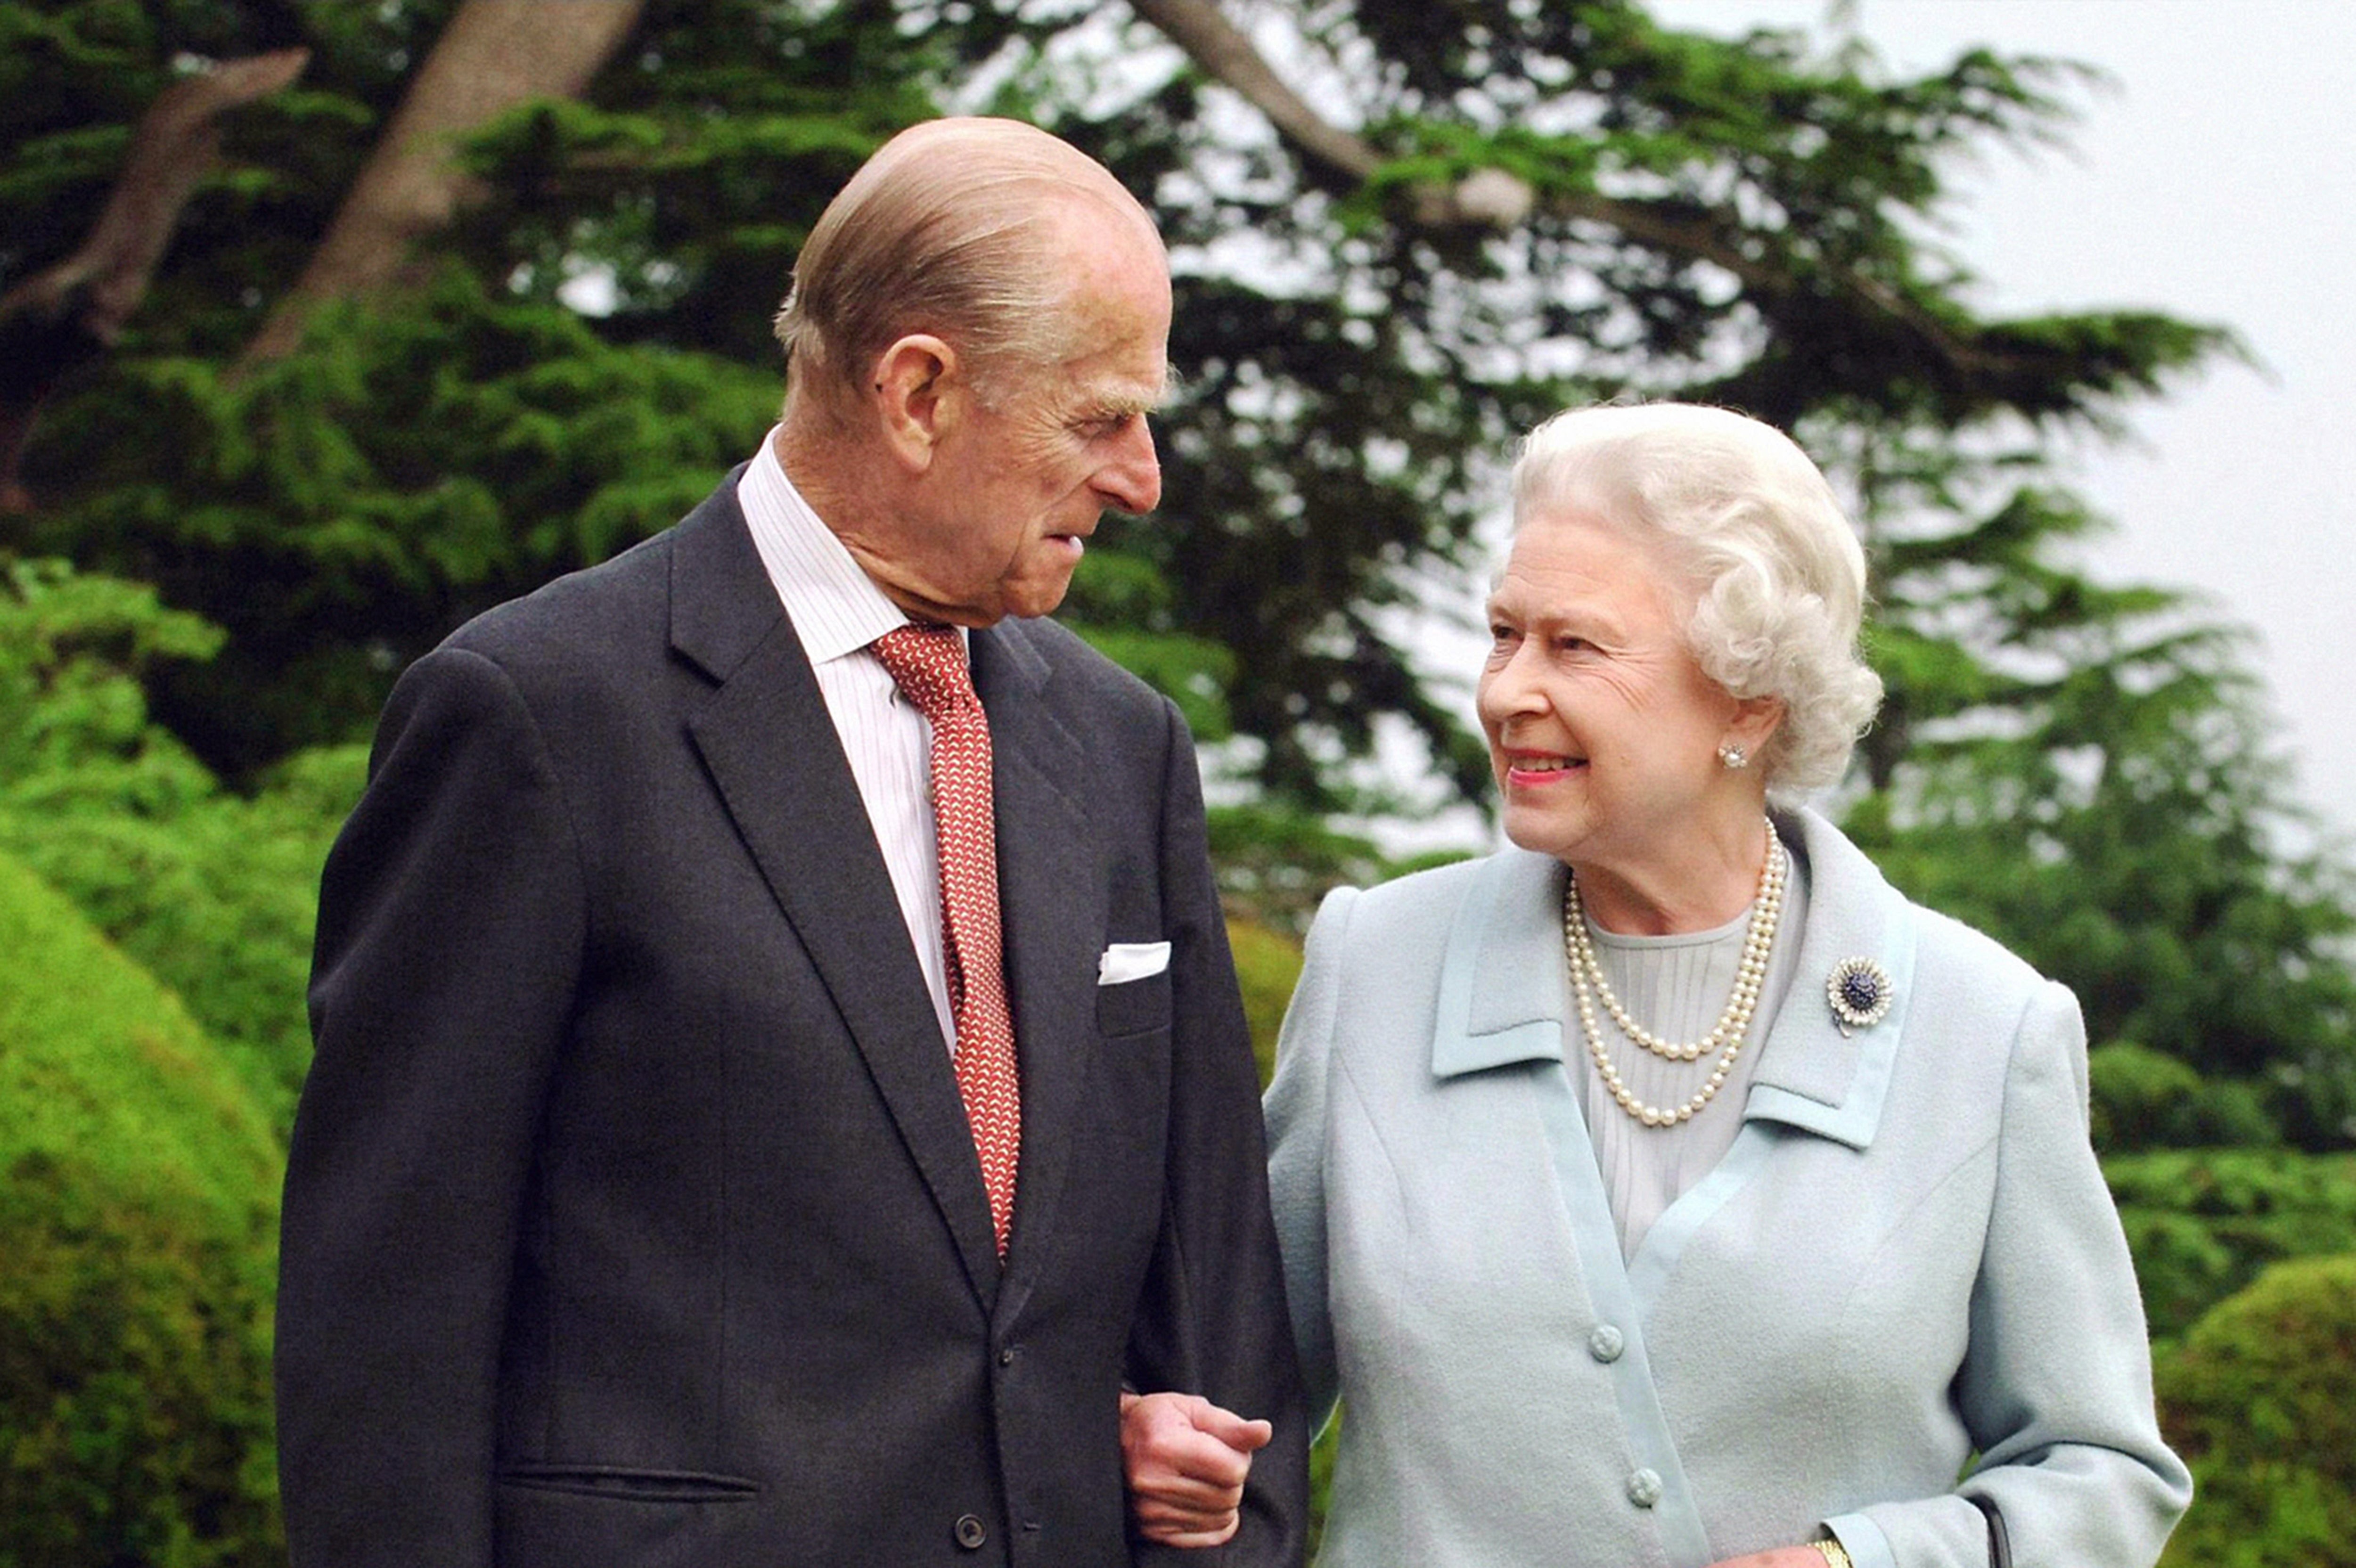 The Queen and the Duke of Edinburgh at Broadlands in 2007 (Fiona Hanson/PA)